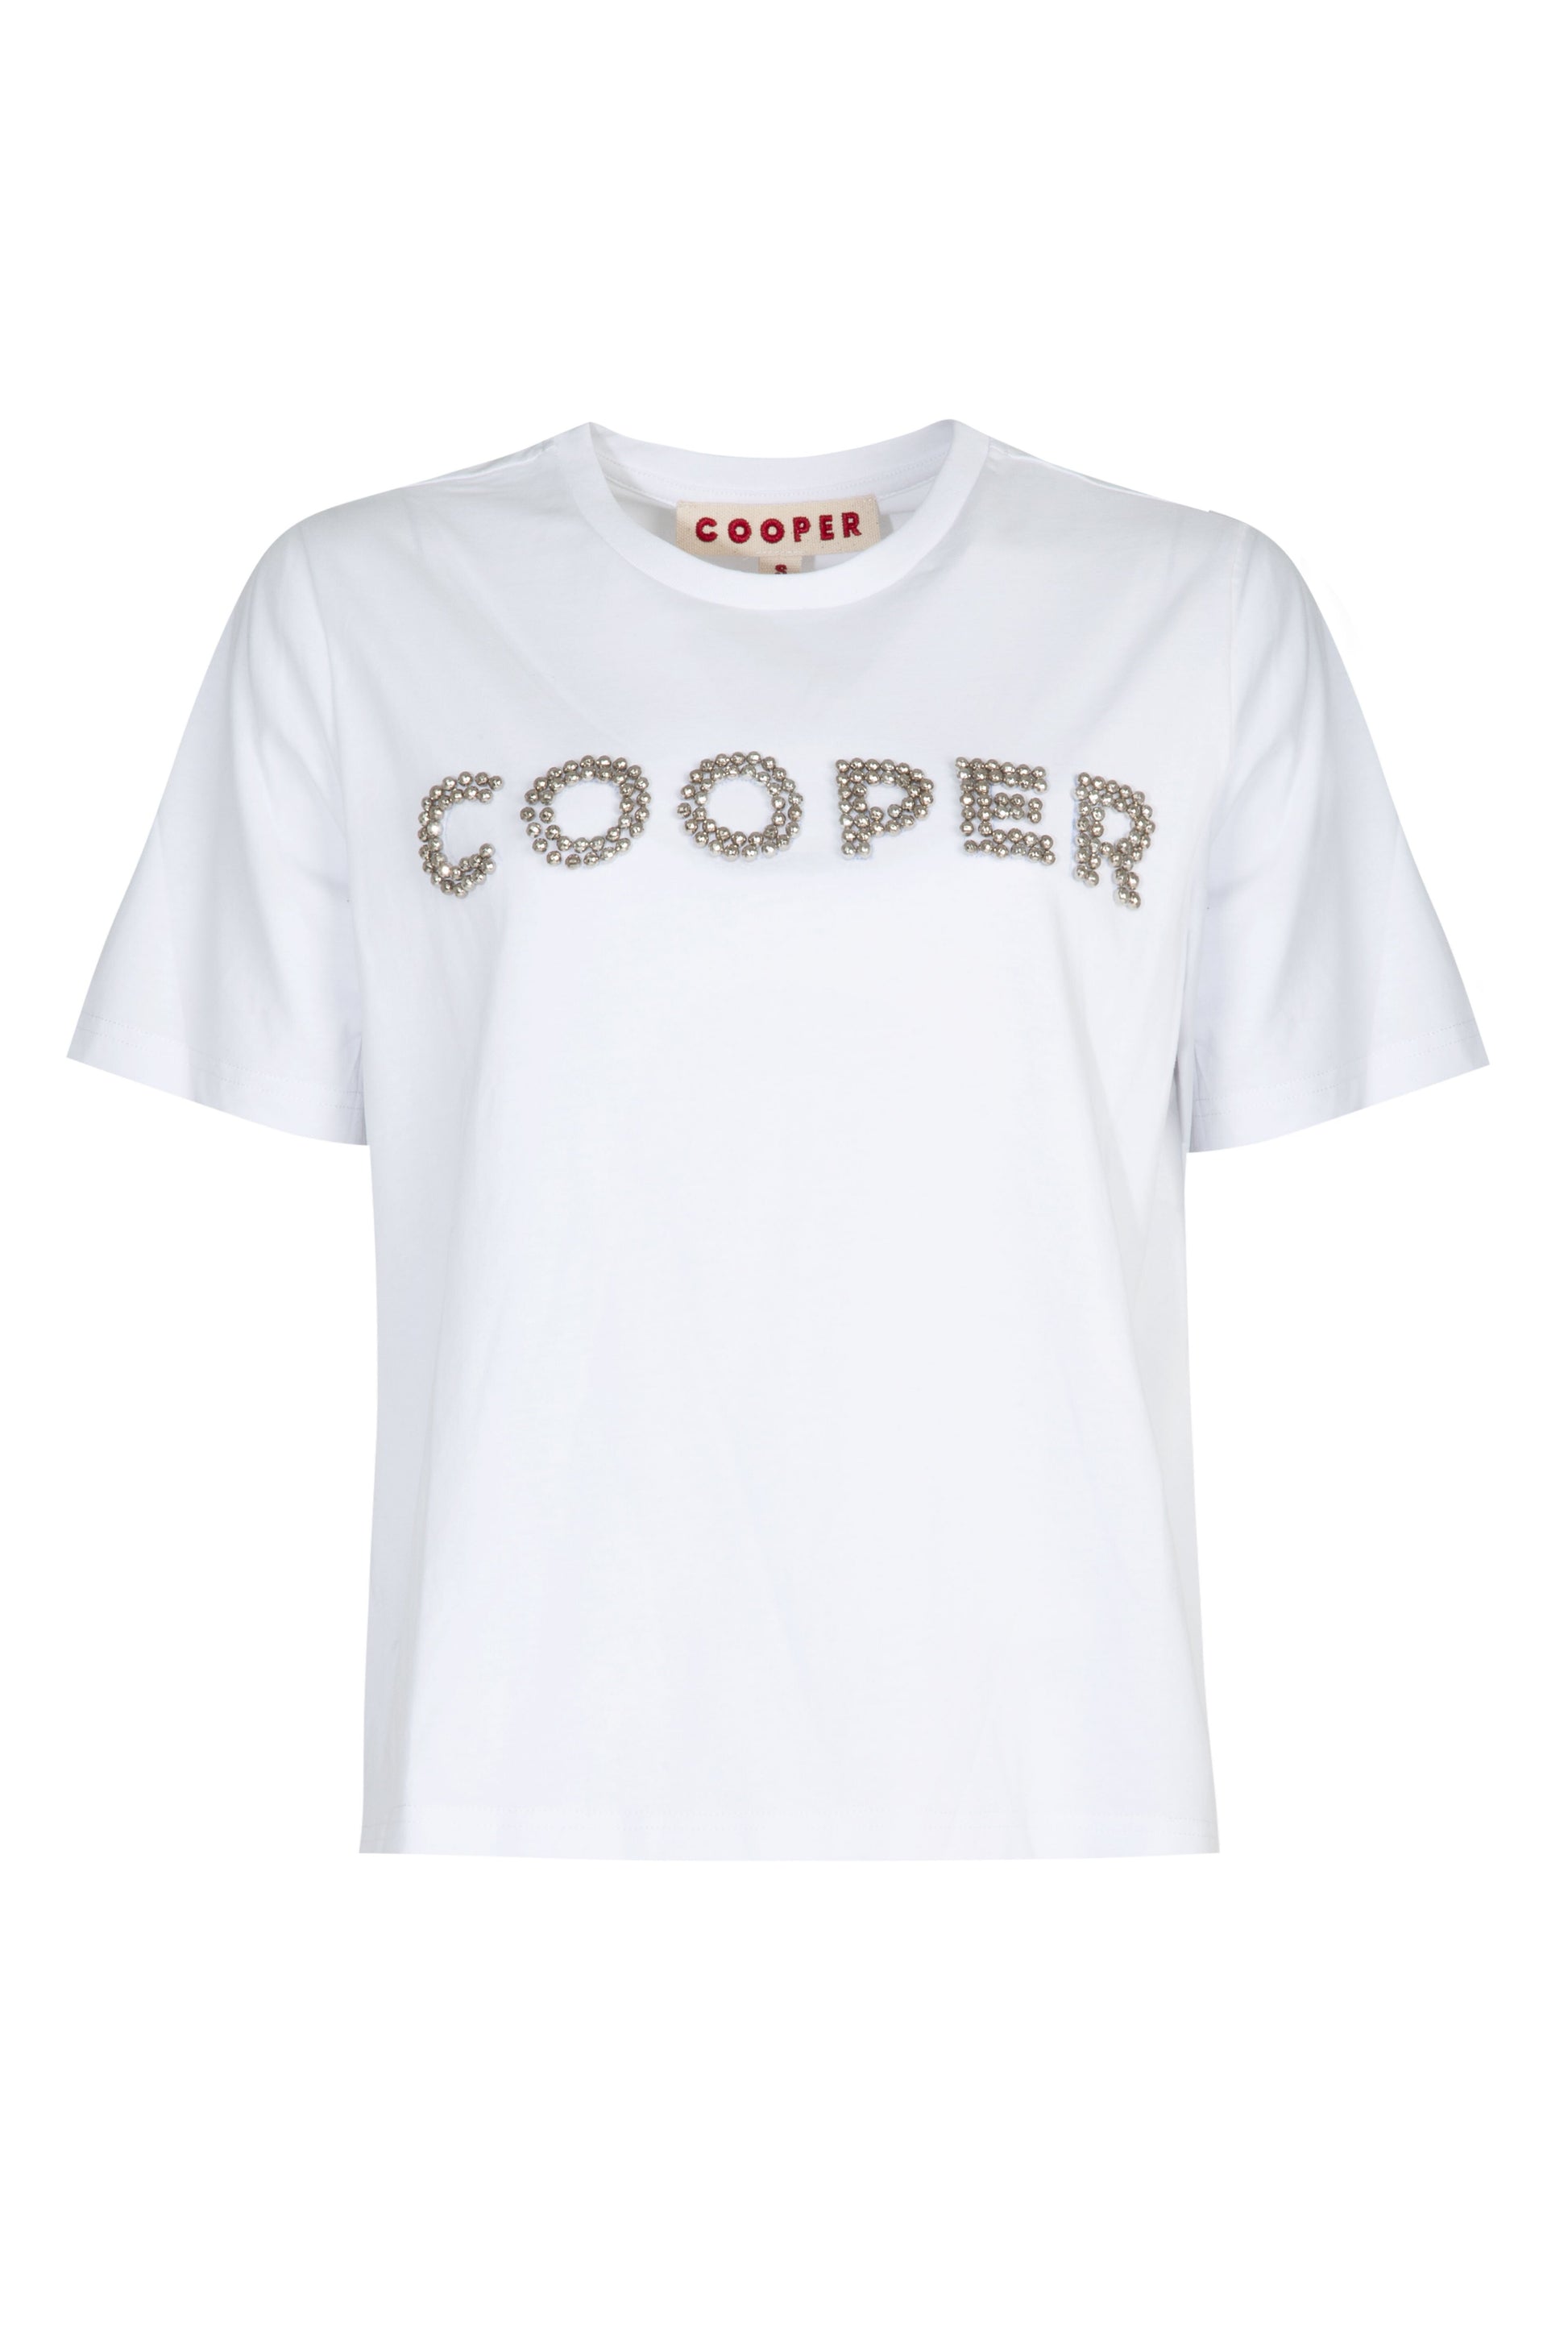 COOPER MY BEADING LADY T-SHIRT - WHITE - THE VOGUE STORE